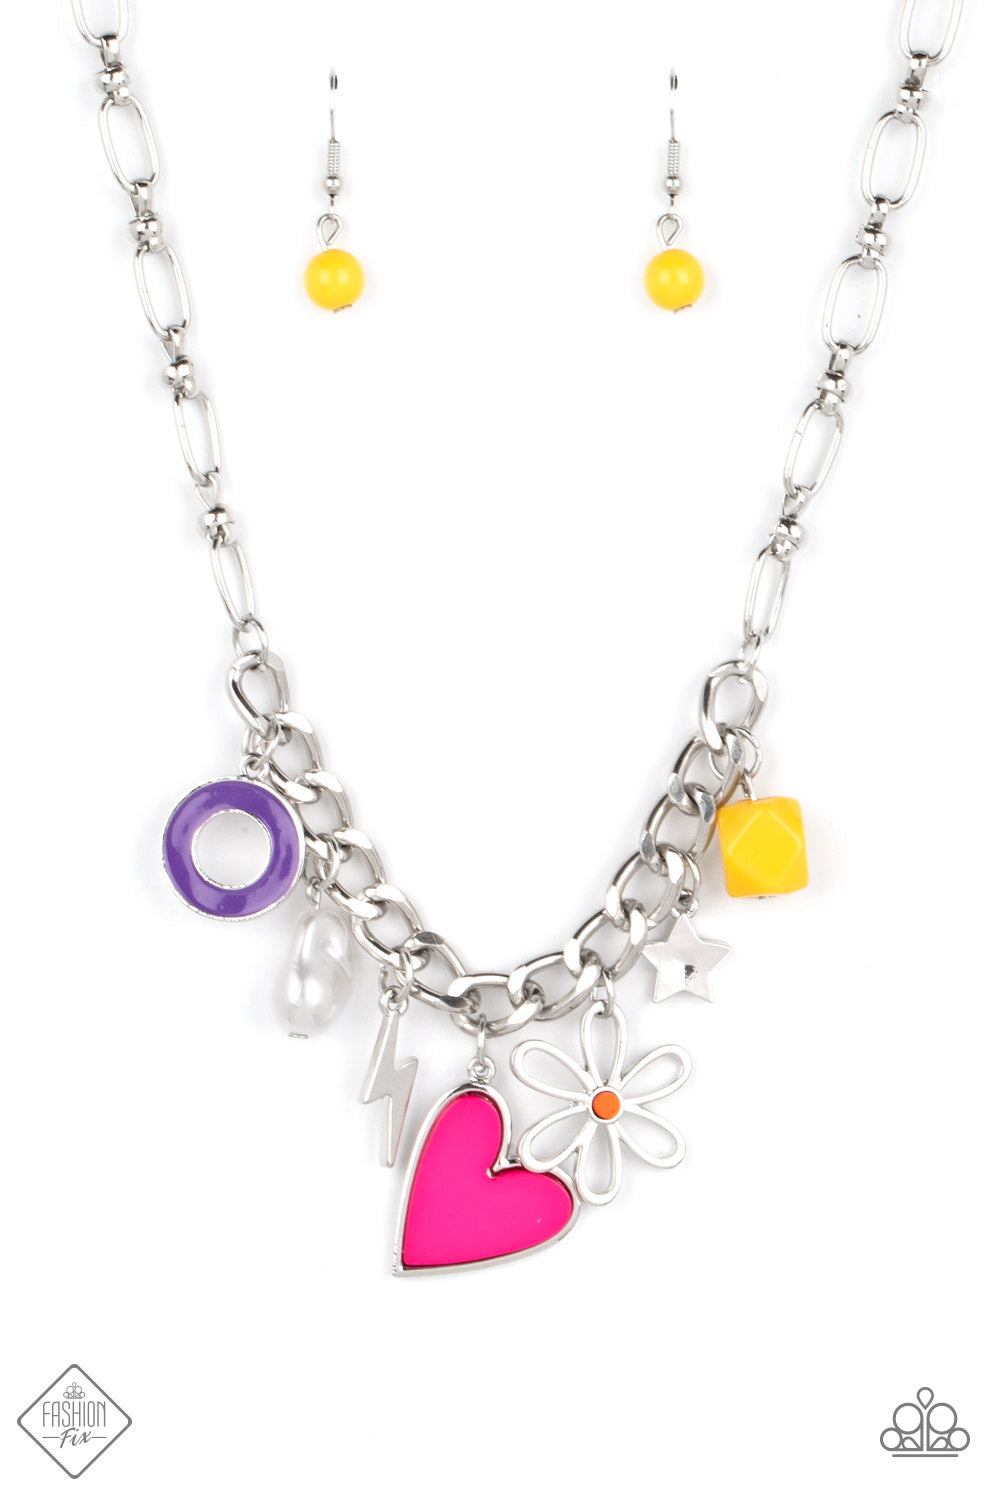 Living in CHARM-ony - Multi Color Charms Necklace - Paparazzi Accessories - Elongated silver chain links, separated by tiny silver beads, lead down the neckline to a section of thick, flat, silver curb chain. A collection of whimsical charms gather along the thicker chain, including a lightning bolt, a star, a purple ring, a silhouette of a flower, a vibrant yellow bead, a pink heart, and a polished white baroque pearl.